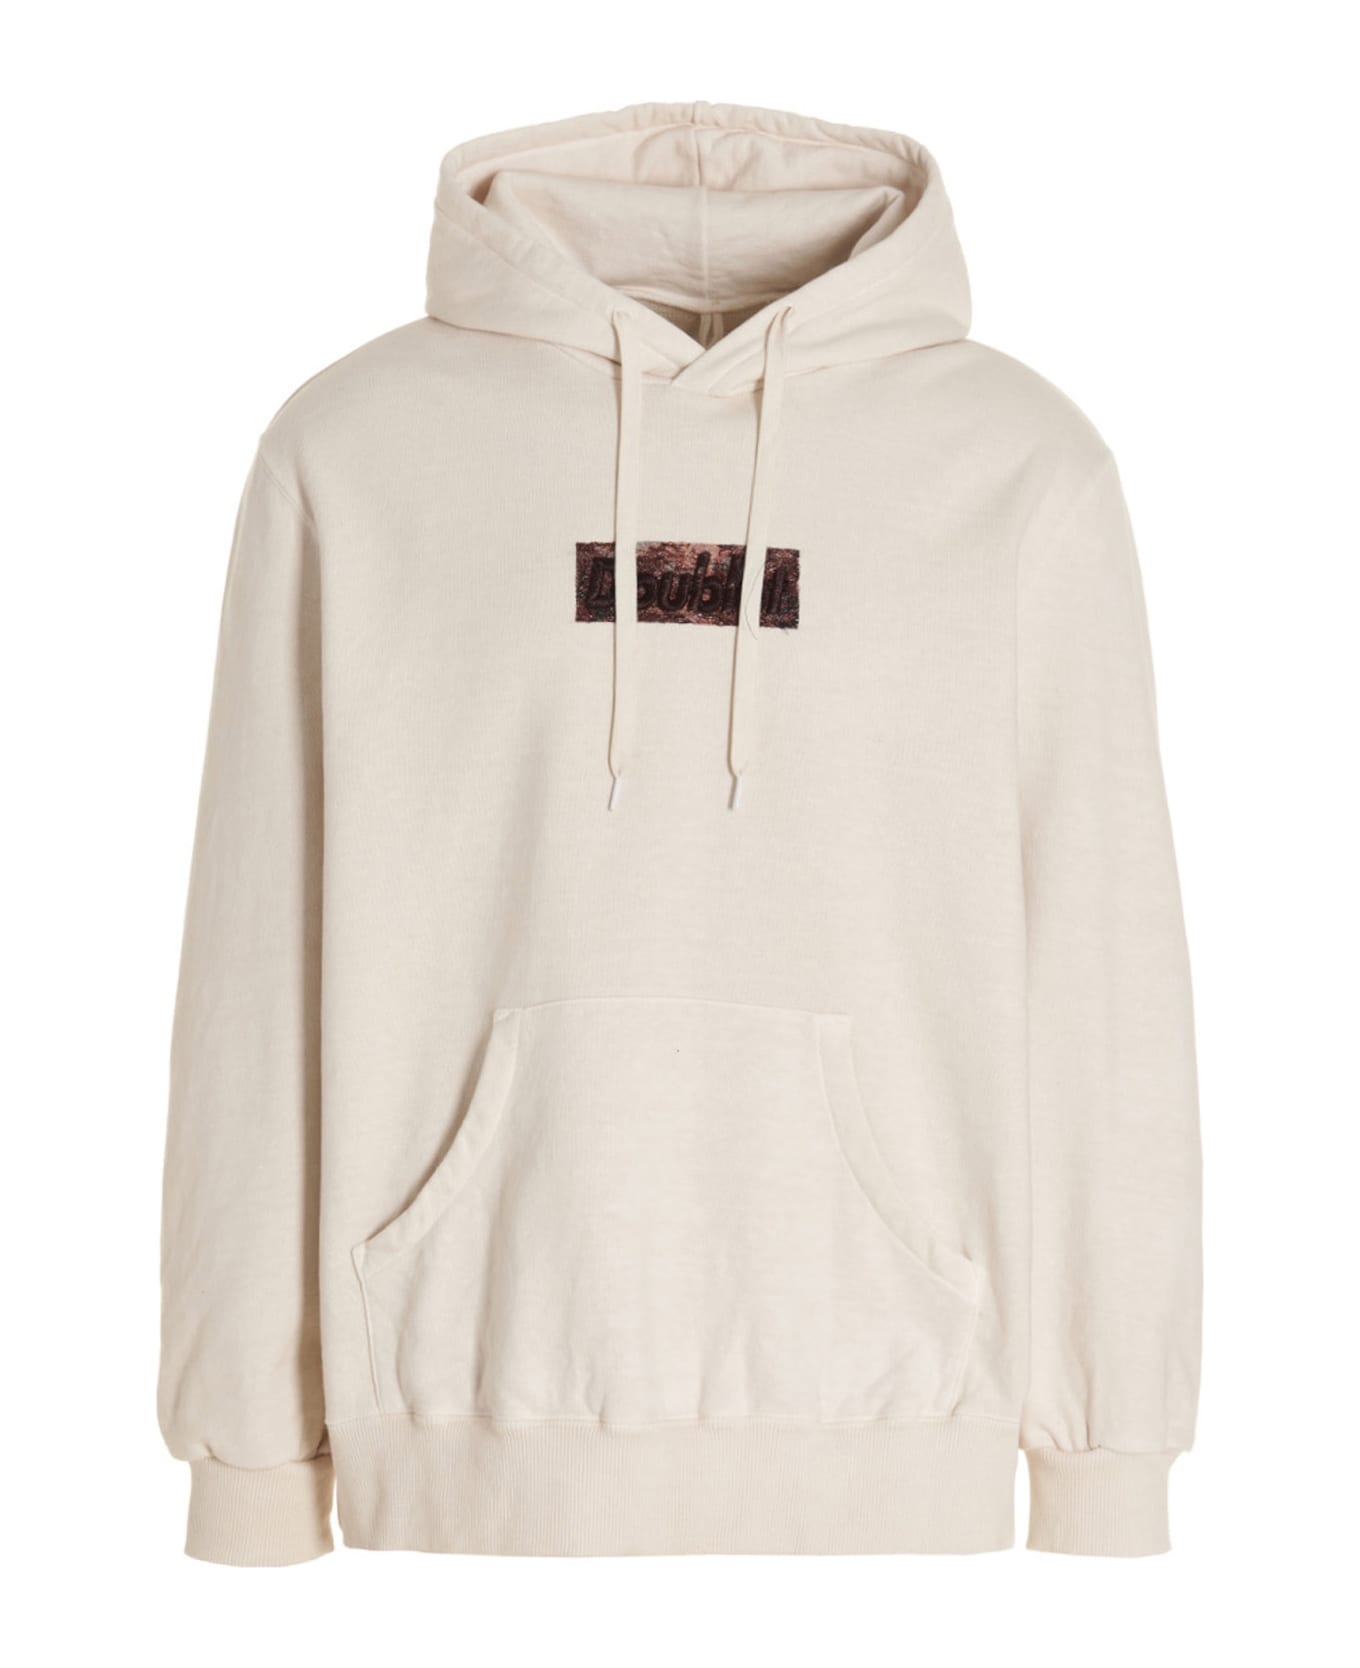 doublet 'polyurethane Embroidery' Hoodie - White